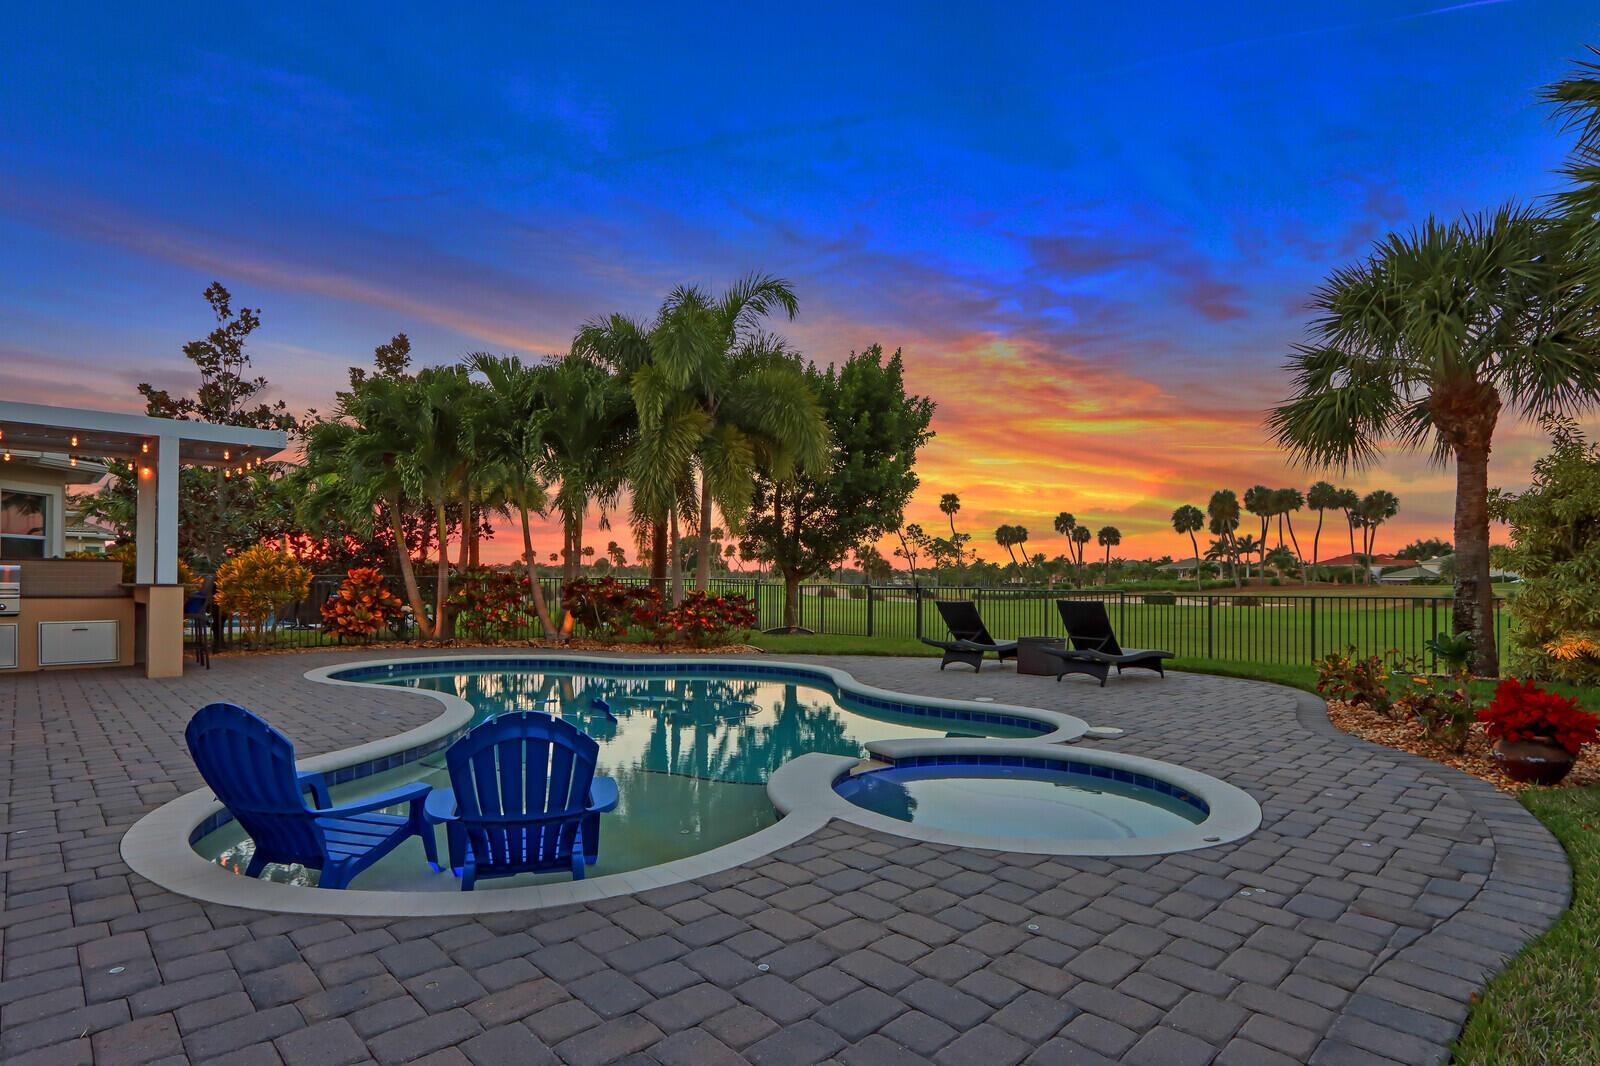 Enjoy the ultimate Florida country club lifestyle in this immaculate home located on the 13th hole of the Jupiter Country Club! This tropical oasis has a large yard and patio with a freeform, salt-chlorinated pool & spa, summer kitchen, electric gazebo roof and tropical landscaping.  This single story home has 3 bedrooms + den, 3 full baths and 3 car garage. The double glass door entry opens to the great room with soaring ceilings and fantastic views of the pool and golf course.  The kitchen has granite counters, custom backsplash, stainless steel appliances including gas stove, breakfast bar and eat in kitchen.  Owners suite overlooks the pool and has dual closets with custom shelving and luxurious bathroom. Other features include travertine floors, planation shutters, 14" tray ceilings, impact glass windows, upgraded lighting, freshly painted, AC with UV light air purification system, surround sound inside and out, 3 car garage with epoxy flooring and built in storage systems. Jupiter Country Club is a gated golf community with a Greg Norman designed golf course, resort style amenities including 6 Har Tru tennis courts, formal &amp; casual dining, pickle ball, fitness center, 2 pools, bocce and basketball. Intermediate golf membership is grandfathered and available for purchase to the buyer of this home.